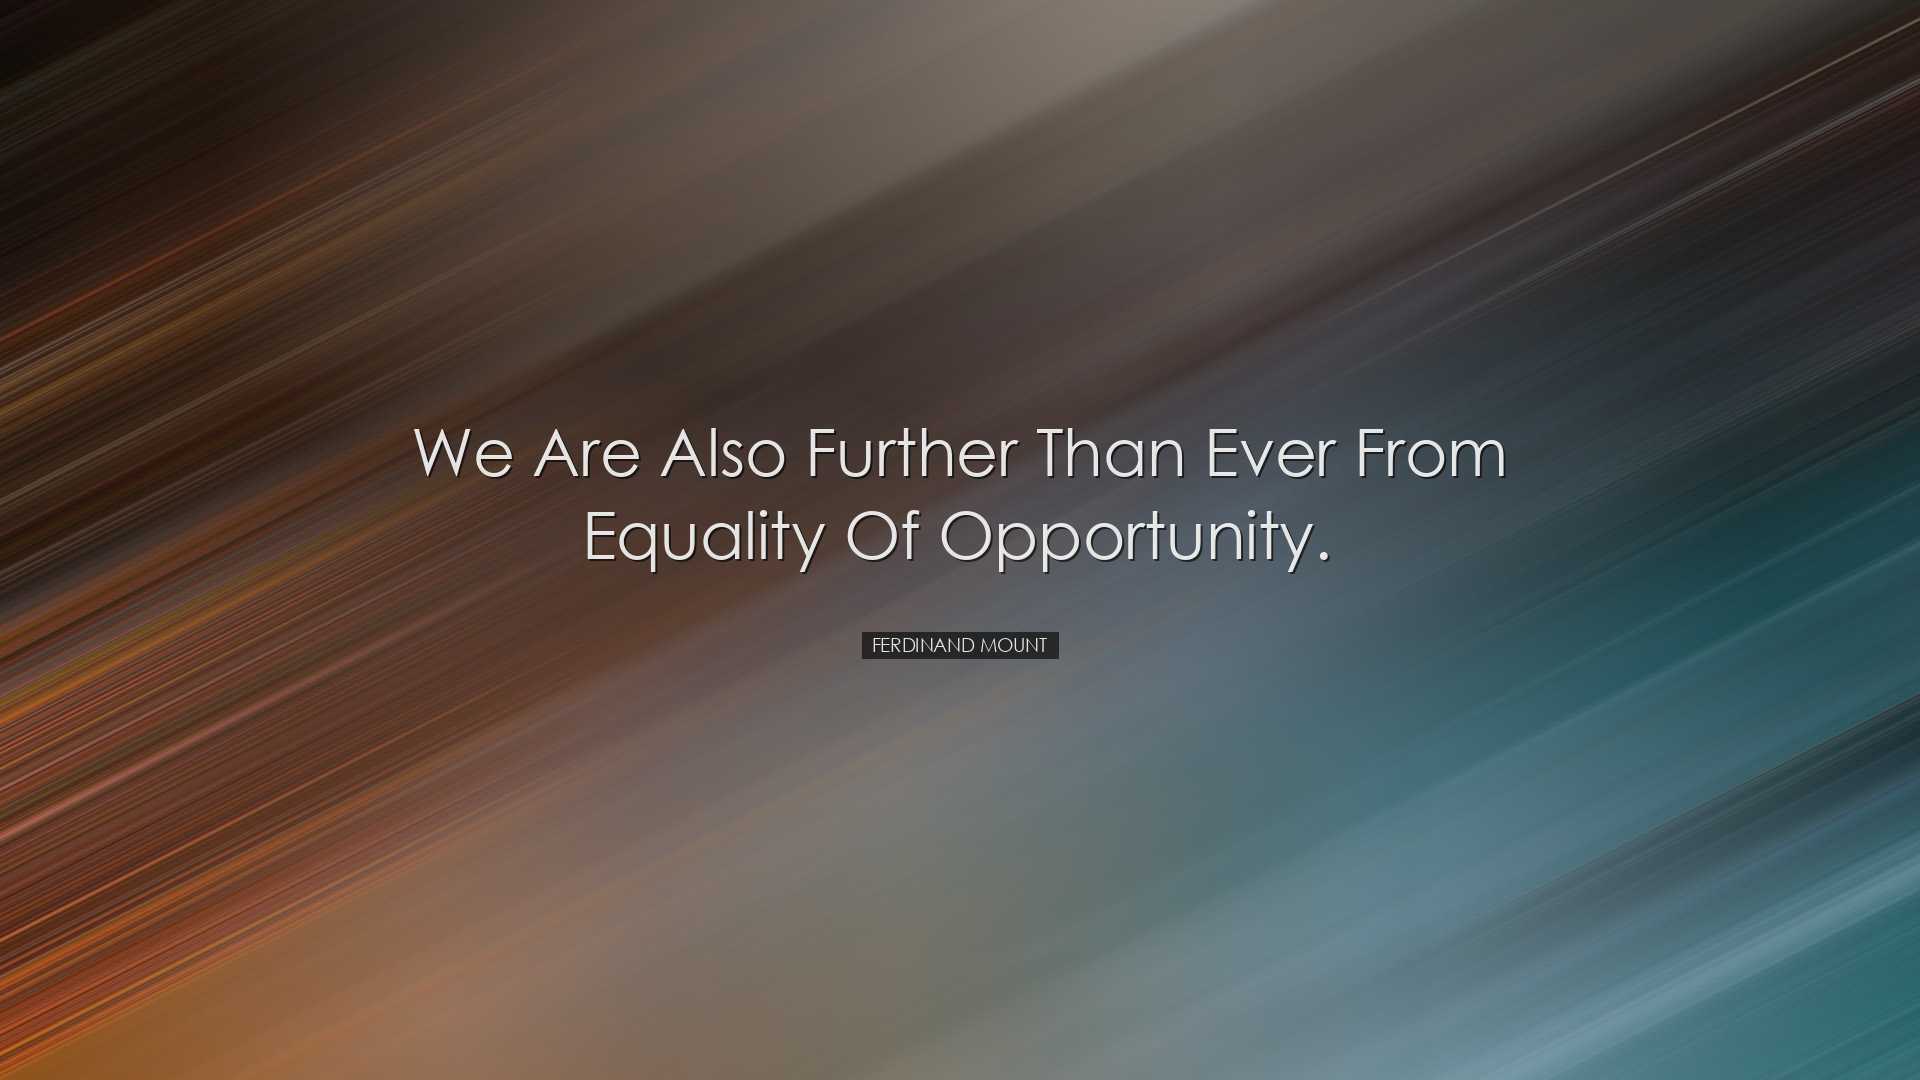 We are also further than ever from equality of opportunity. - Ferd